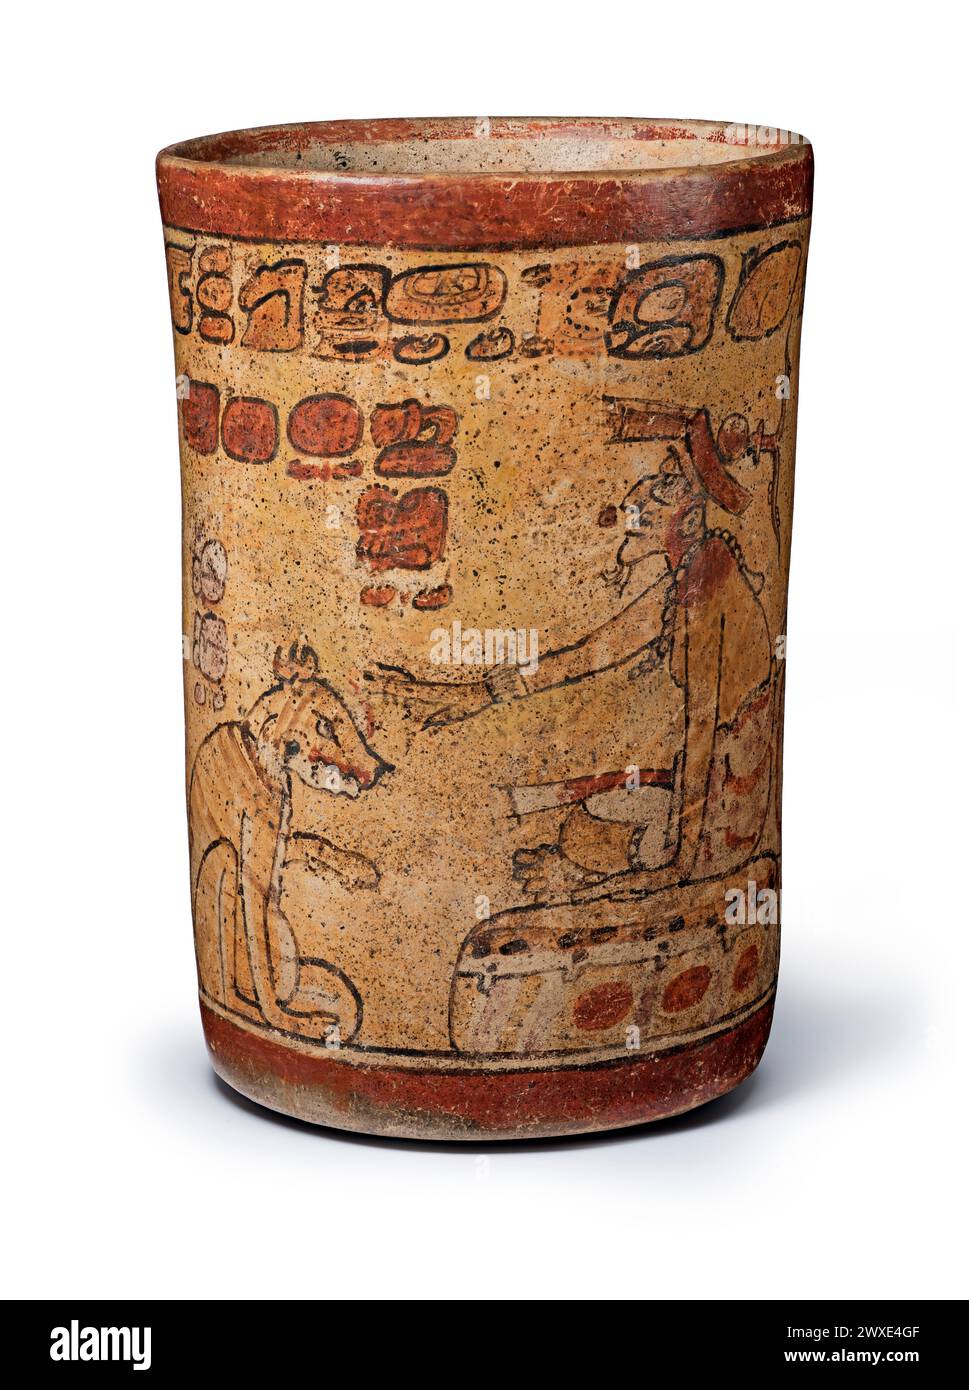 Classic period Maya slip-painted ceramic polychrome cylinder vessel from Guatemala or Mexico depicting Vessel with Itzamnaaj, Dog, and Hero Twins. Maya, 600-900 CE. 16.5cm high. Stock Photo